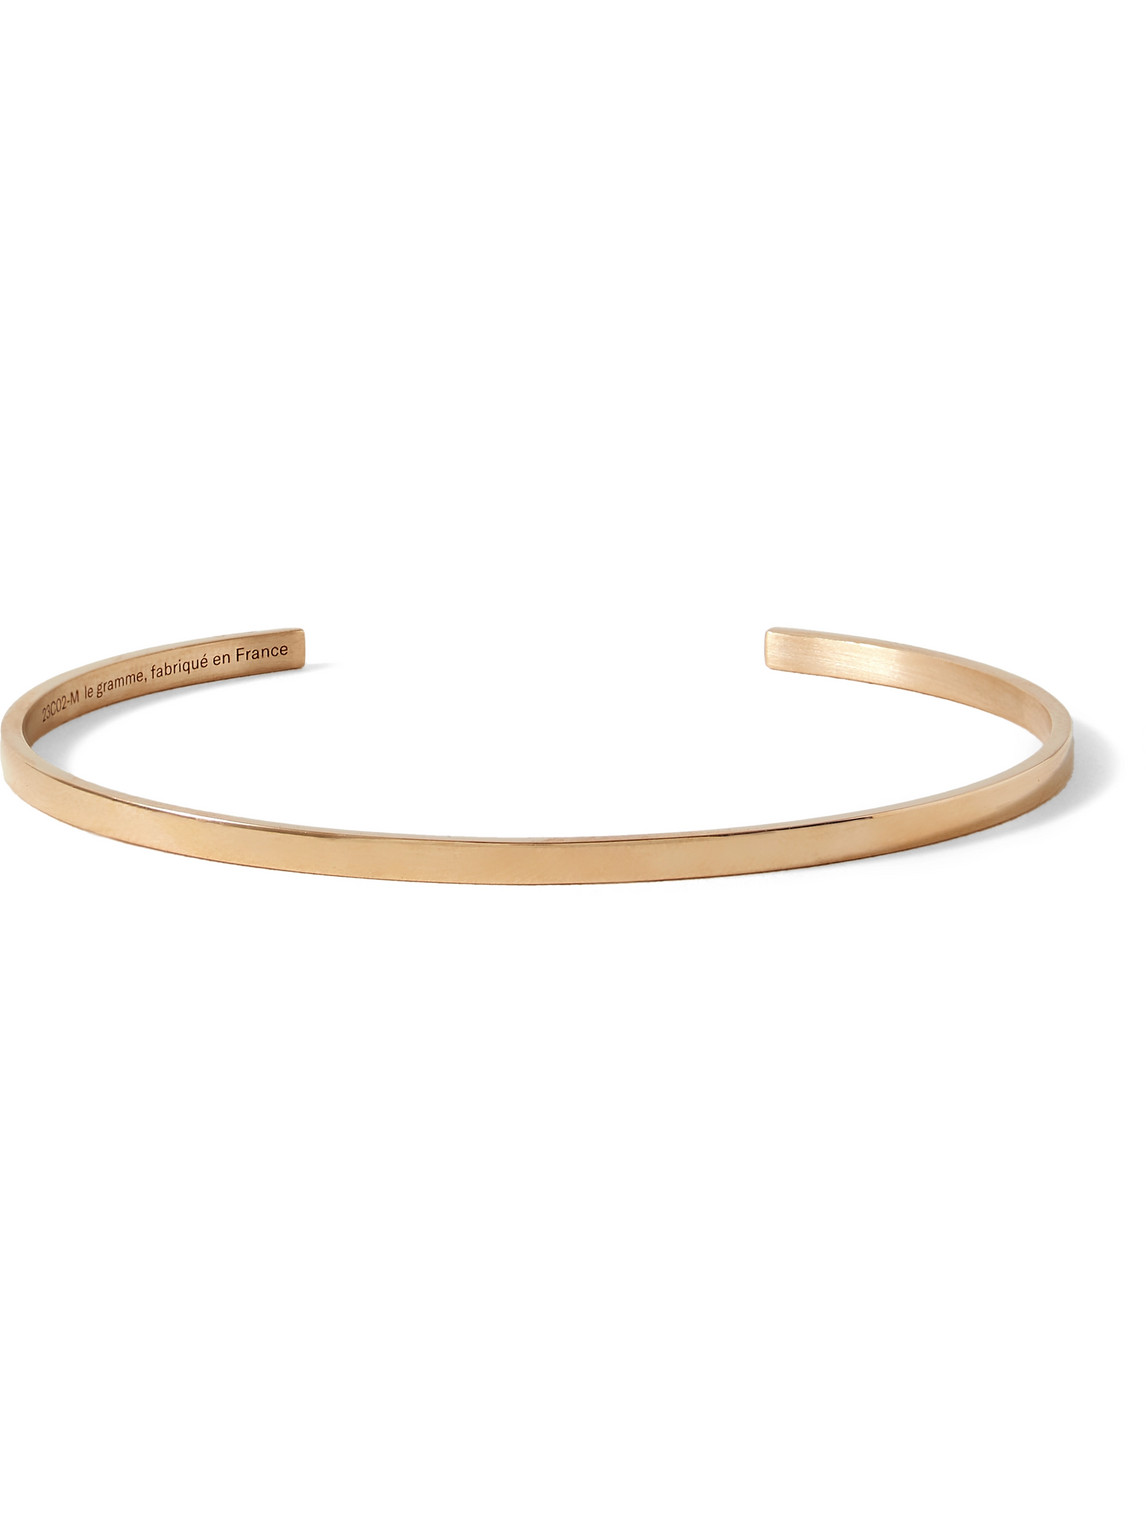 LE GRAMME 7G BRUSHED 18-KARAT RED GOLD CUFF